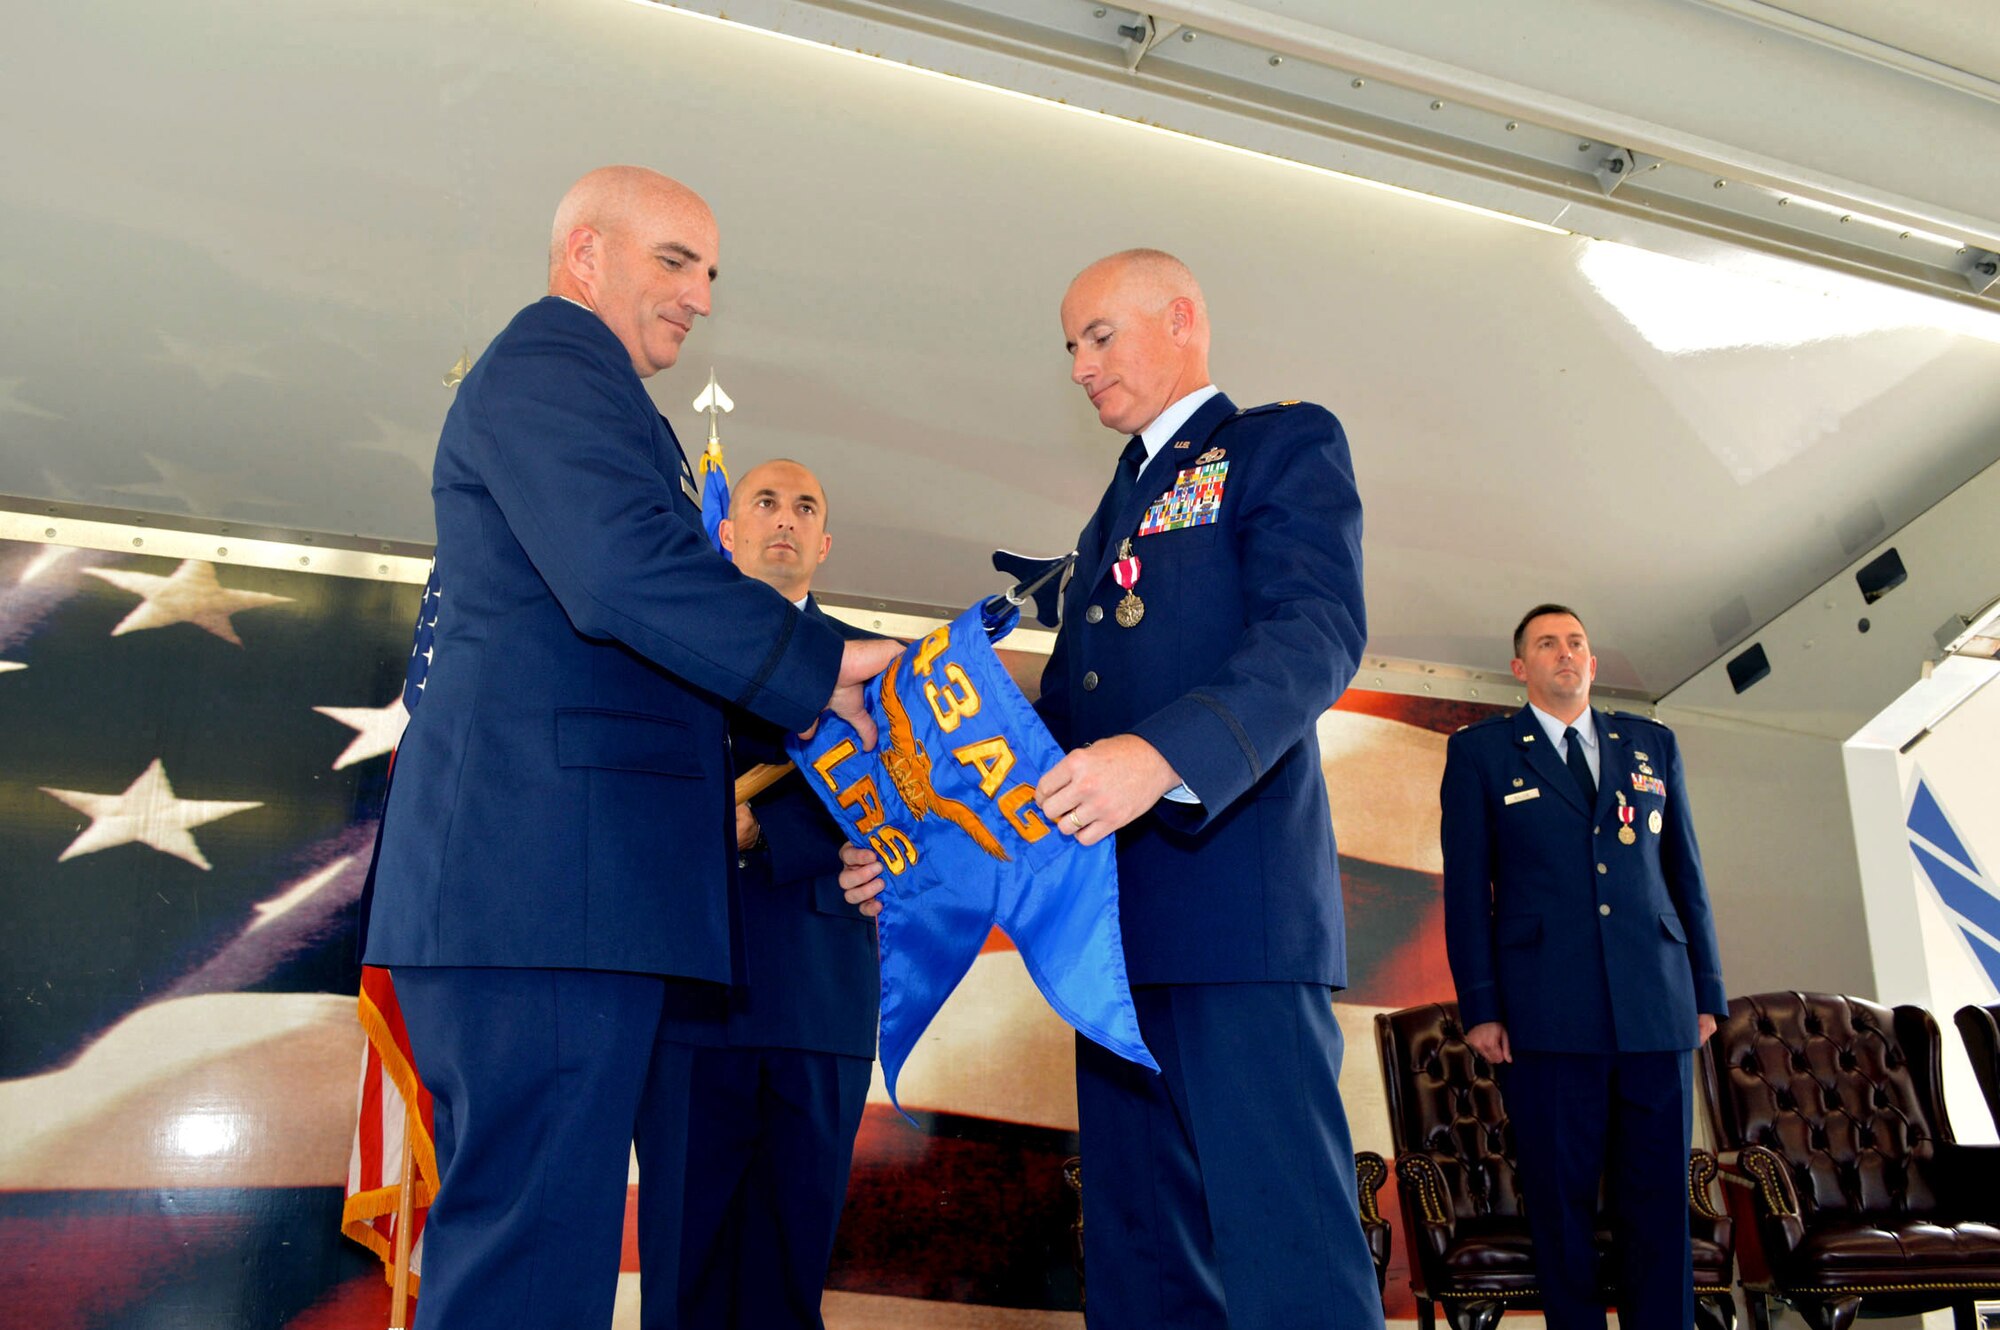 Maj. Peyton Smith, 43rd Logistics Readiness Squadron commander, right, and Col. Kenneth Moss, 43rd Airlift Group commander, case the 43rd LRS guidon during the 43rd Air Base Squadron redesignation and change of command ceremony July 1, 2015, at Pope Army Airfield, North Carolina. Logistics and force support Airmen and functions transferred to the newly established 43rd ABS from the inactivated 43rd LRS and the 43rd Force Support Squadron. (U.S. Air Force photo/Marvin Krause)